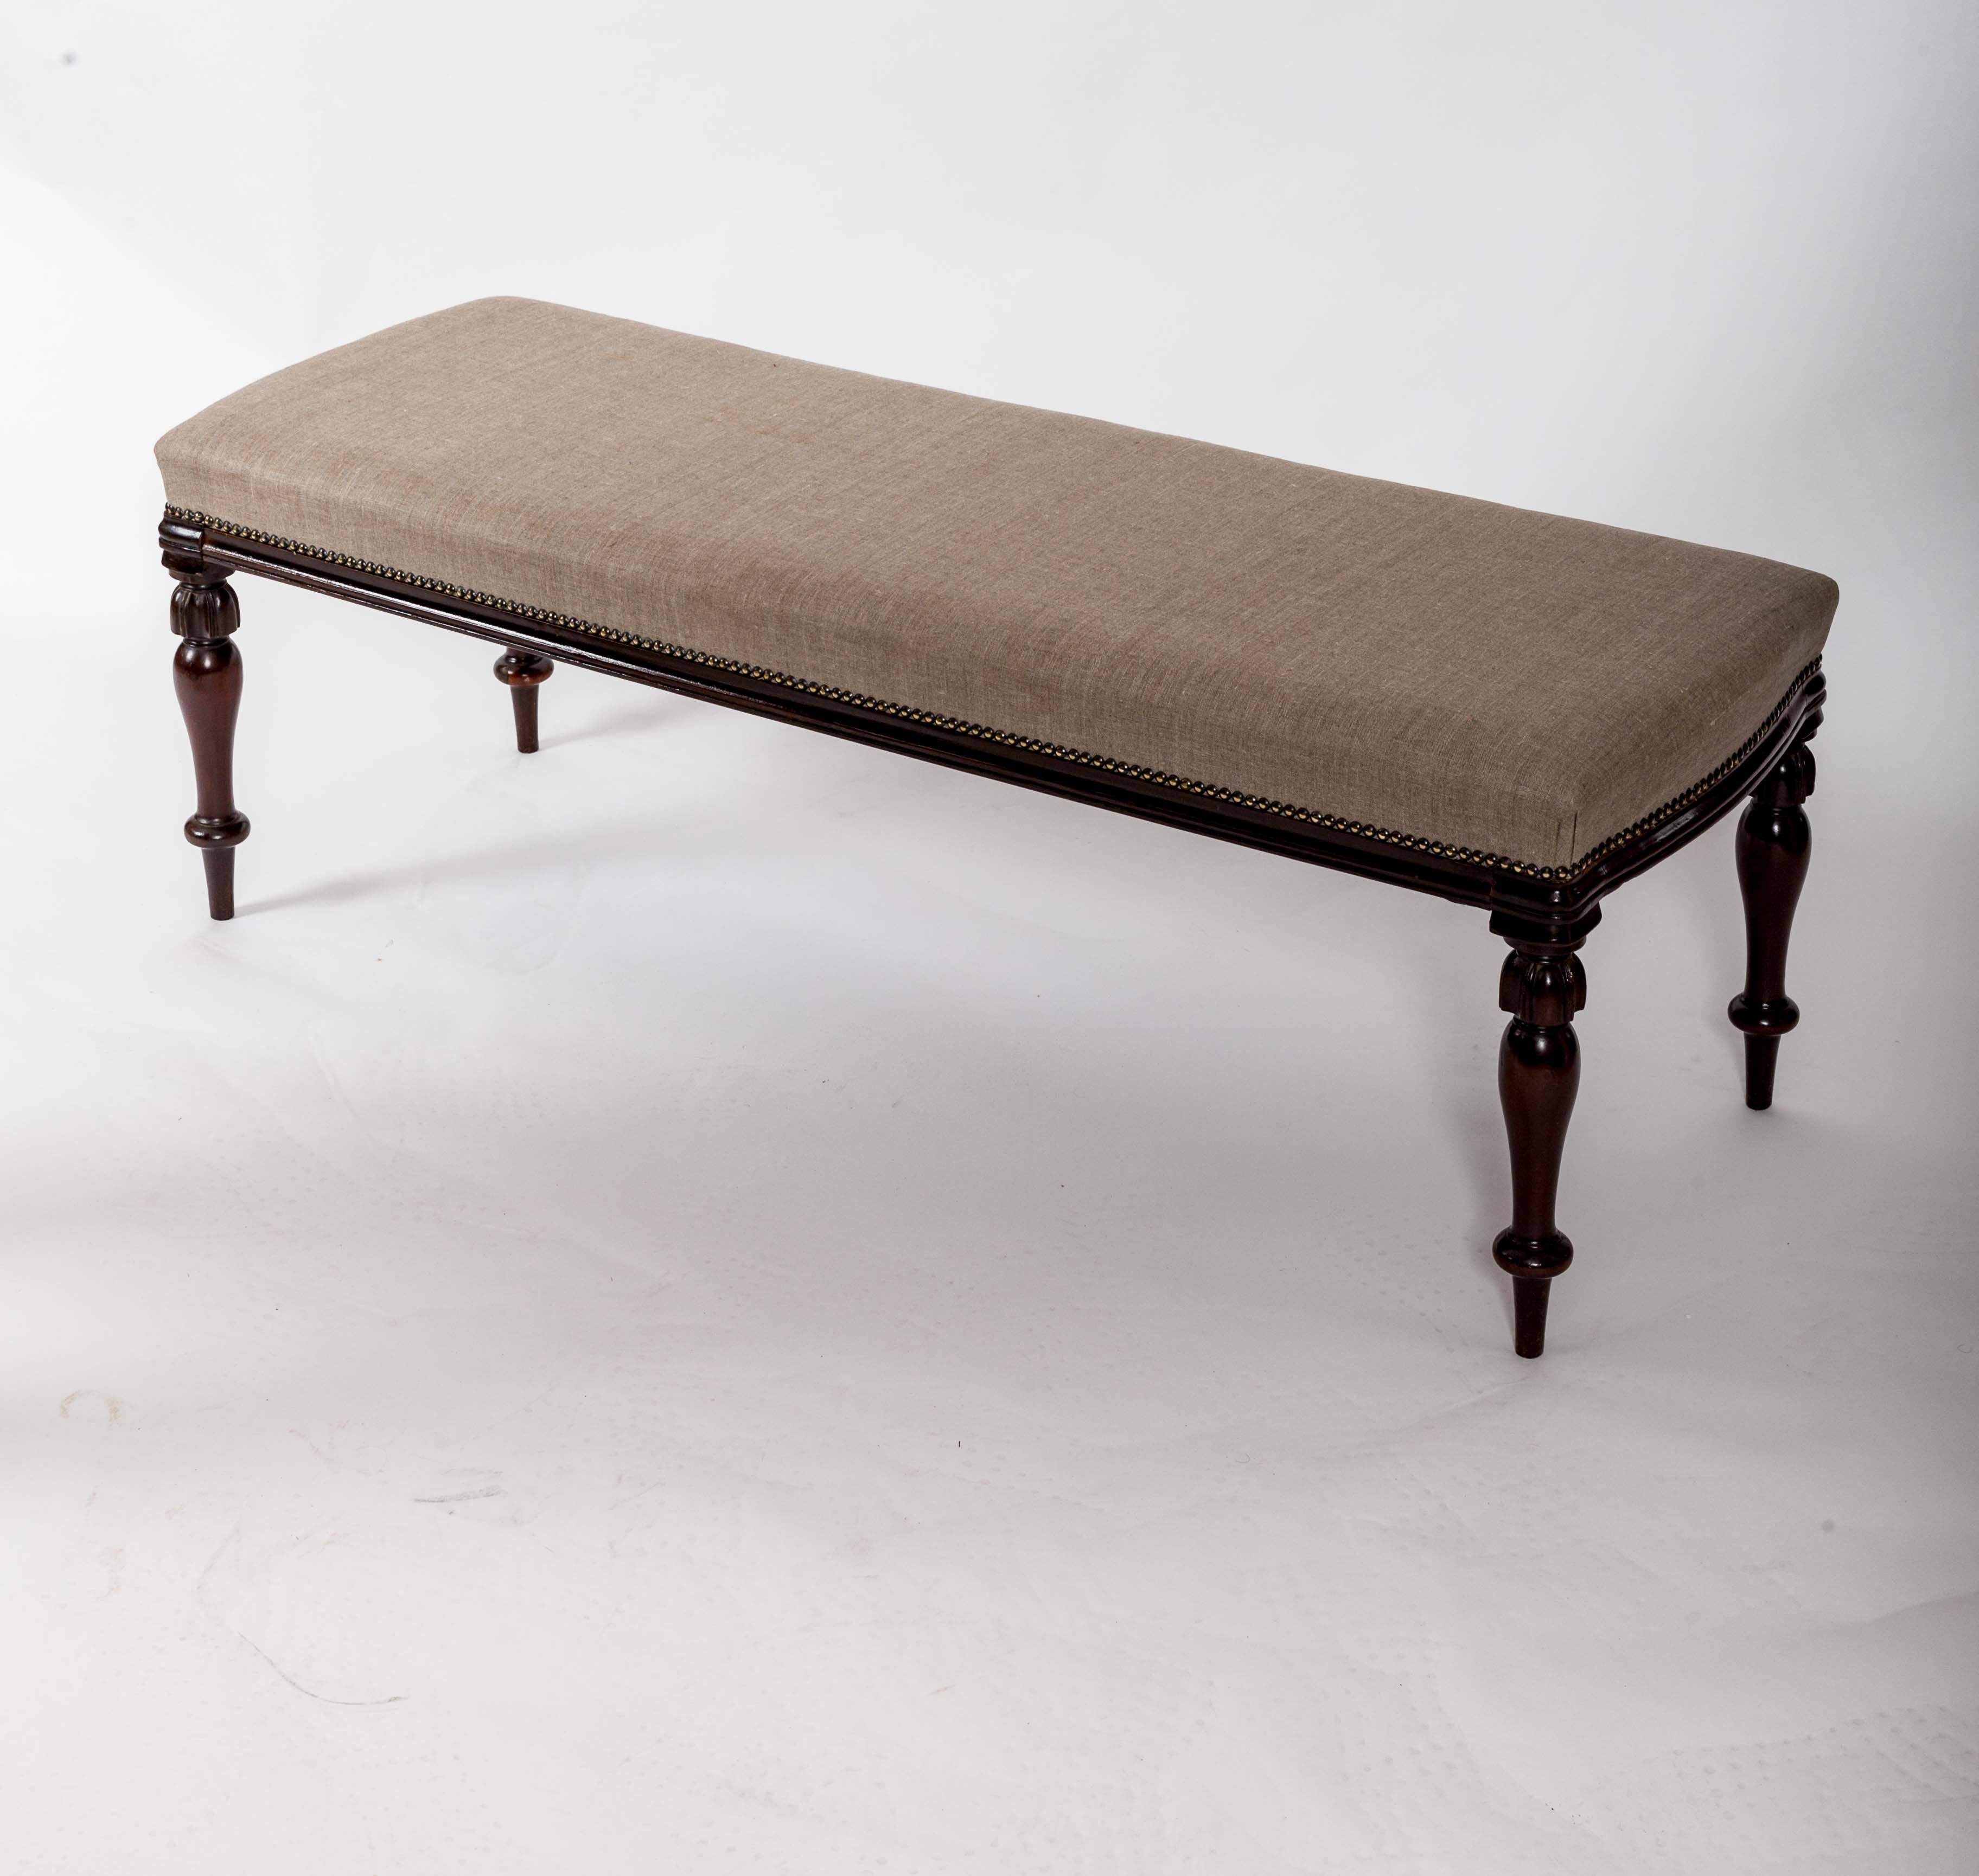 Linen upholstered with nailheads, reeded and turned legs. Wooded molded edge. Perfect for the foot of a bed. Measures: 46.5